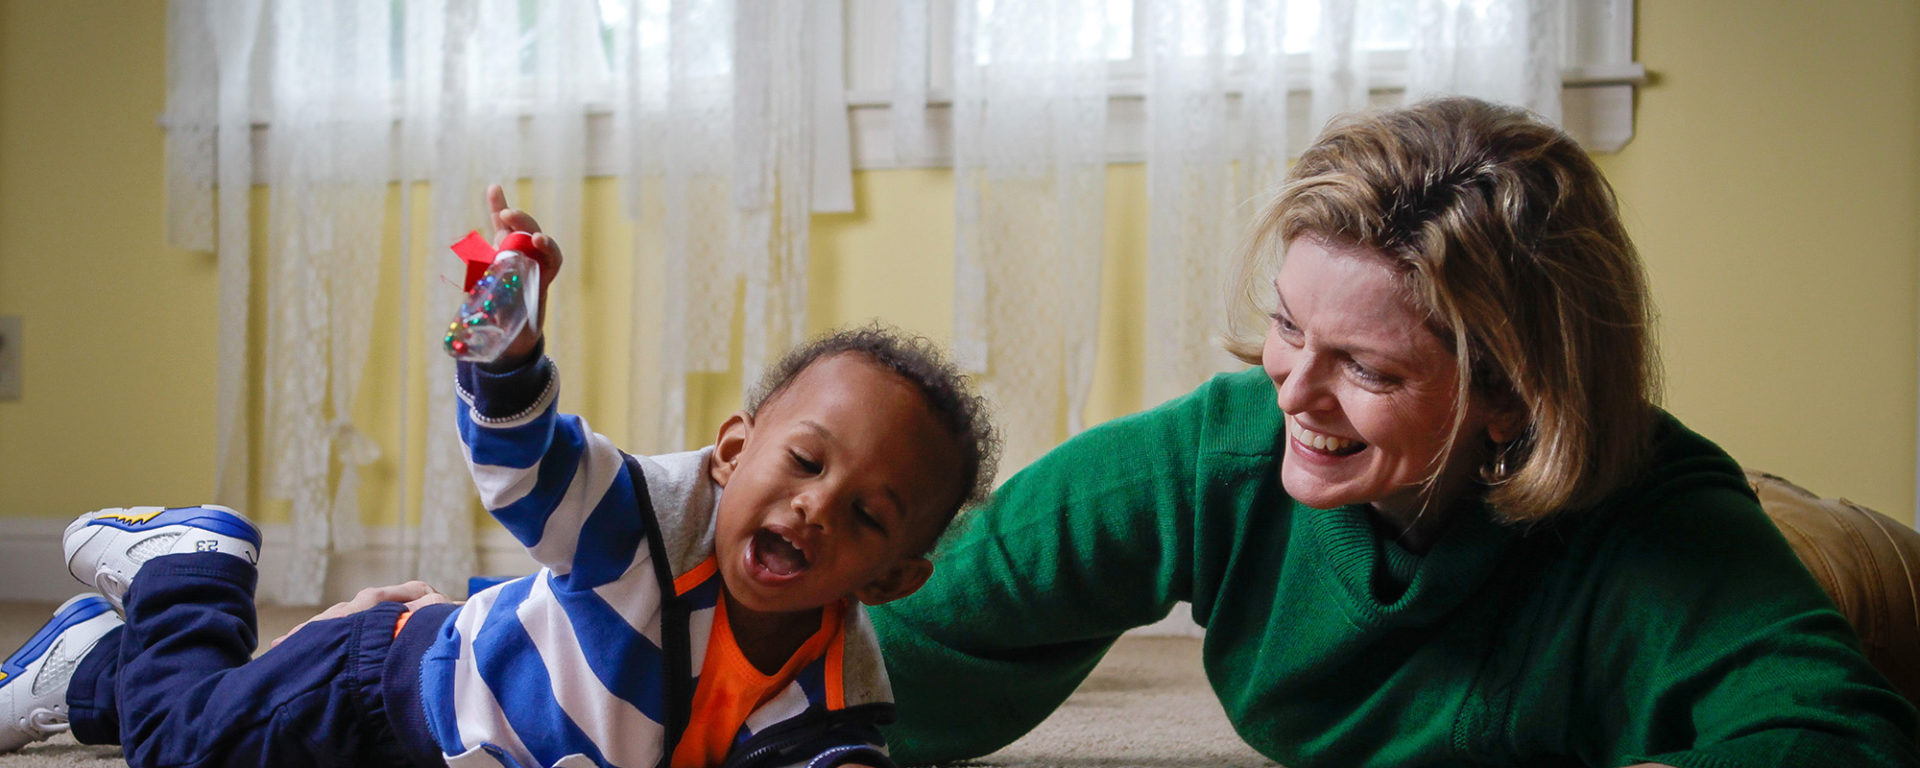 Anne Zachry, assistant professor of occupational therapy at UT Health Science Center and author of Retro Baby, plays with Gabriel (Gabe) Lewis, 1, son of Keisha Brooks (Martin ’98, HSC ’99), an assistant professor at UTHSC.